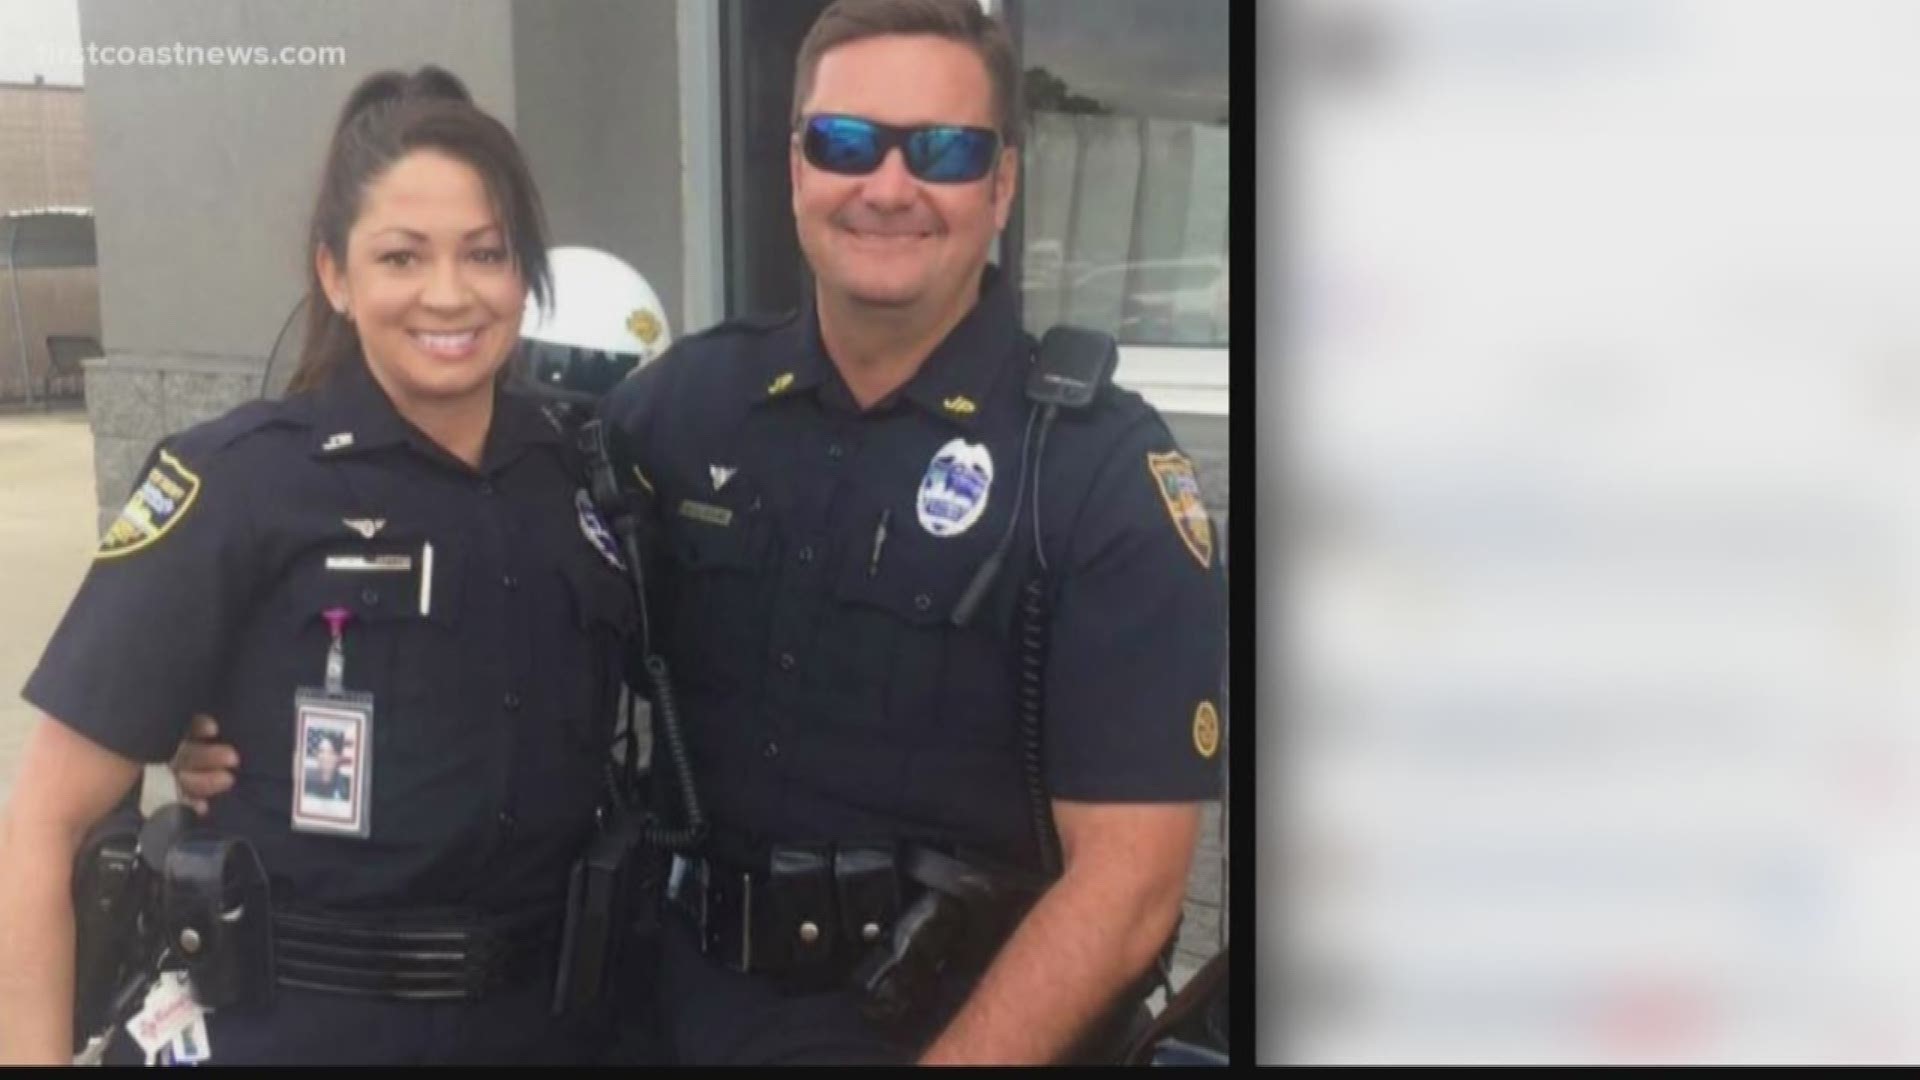 The Jacksonville Sheriff's office confirmed Sunday evening that JSO court bailiff Cathy Adams has died after authorities say she and her family were struck by a suspected drunk driver on I-95.